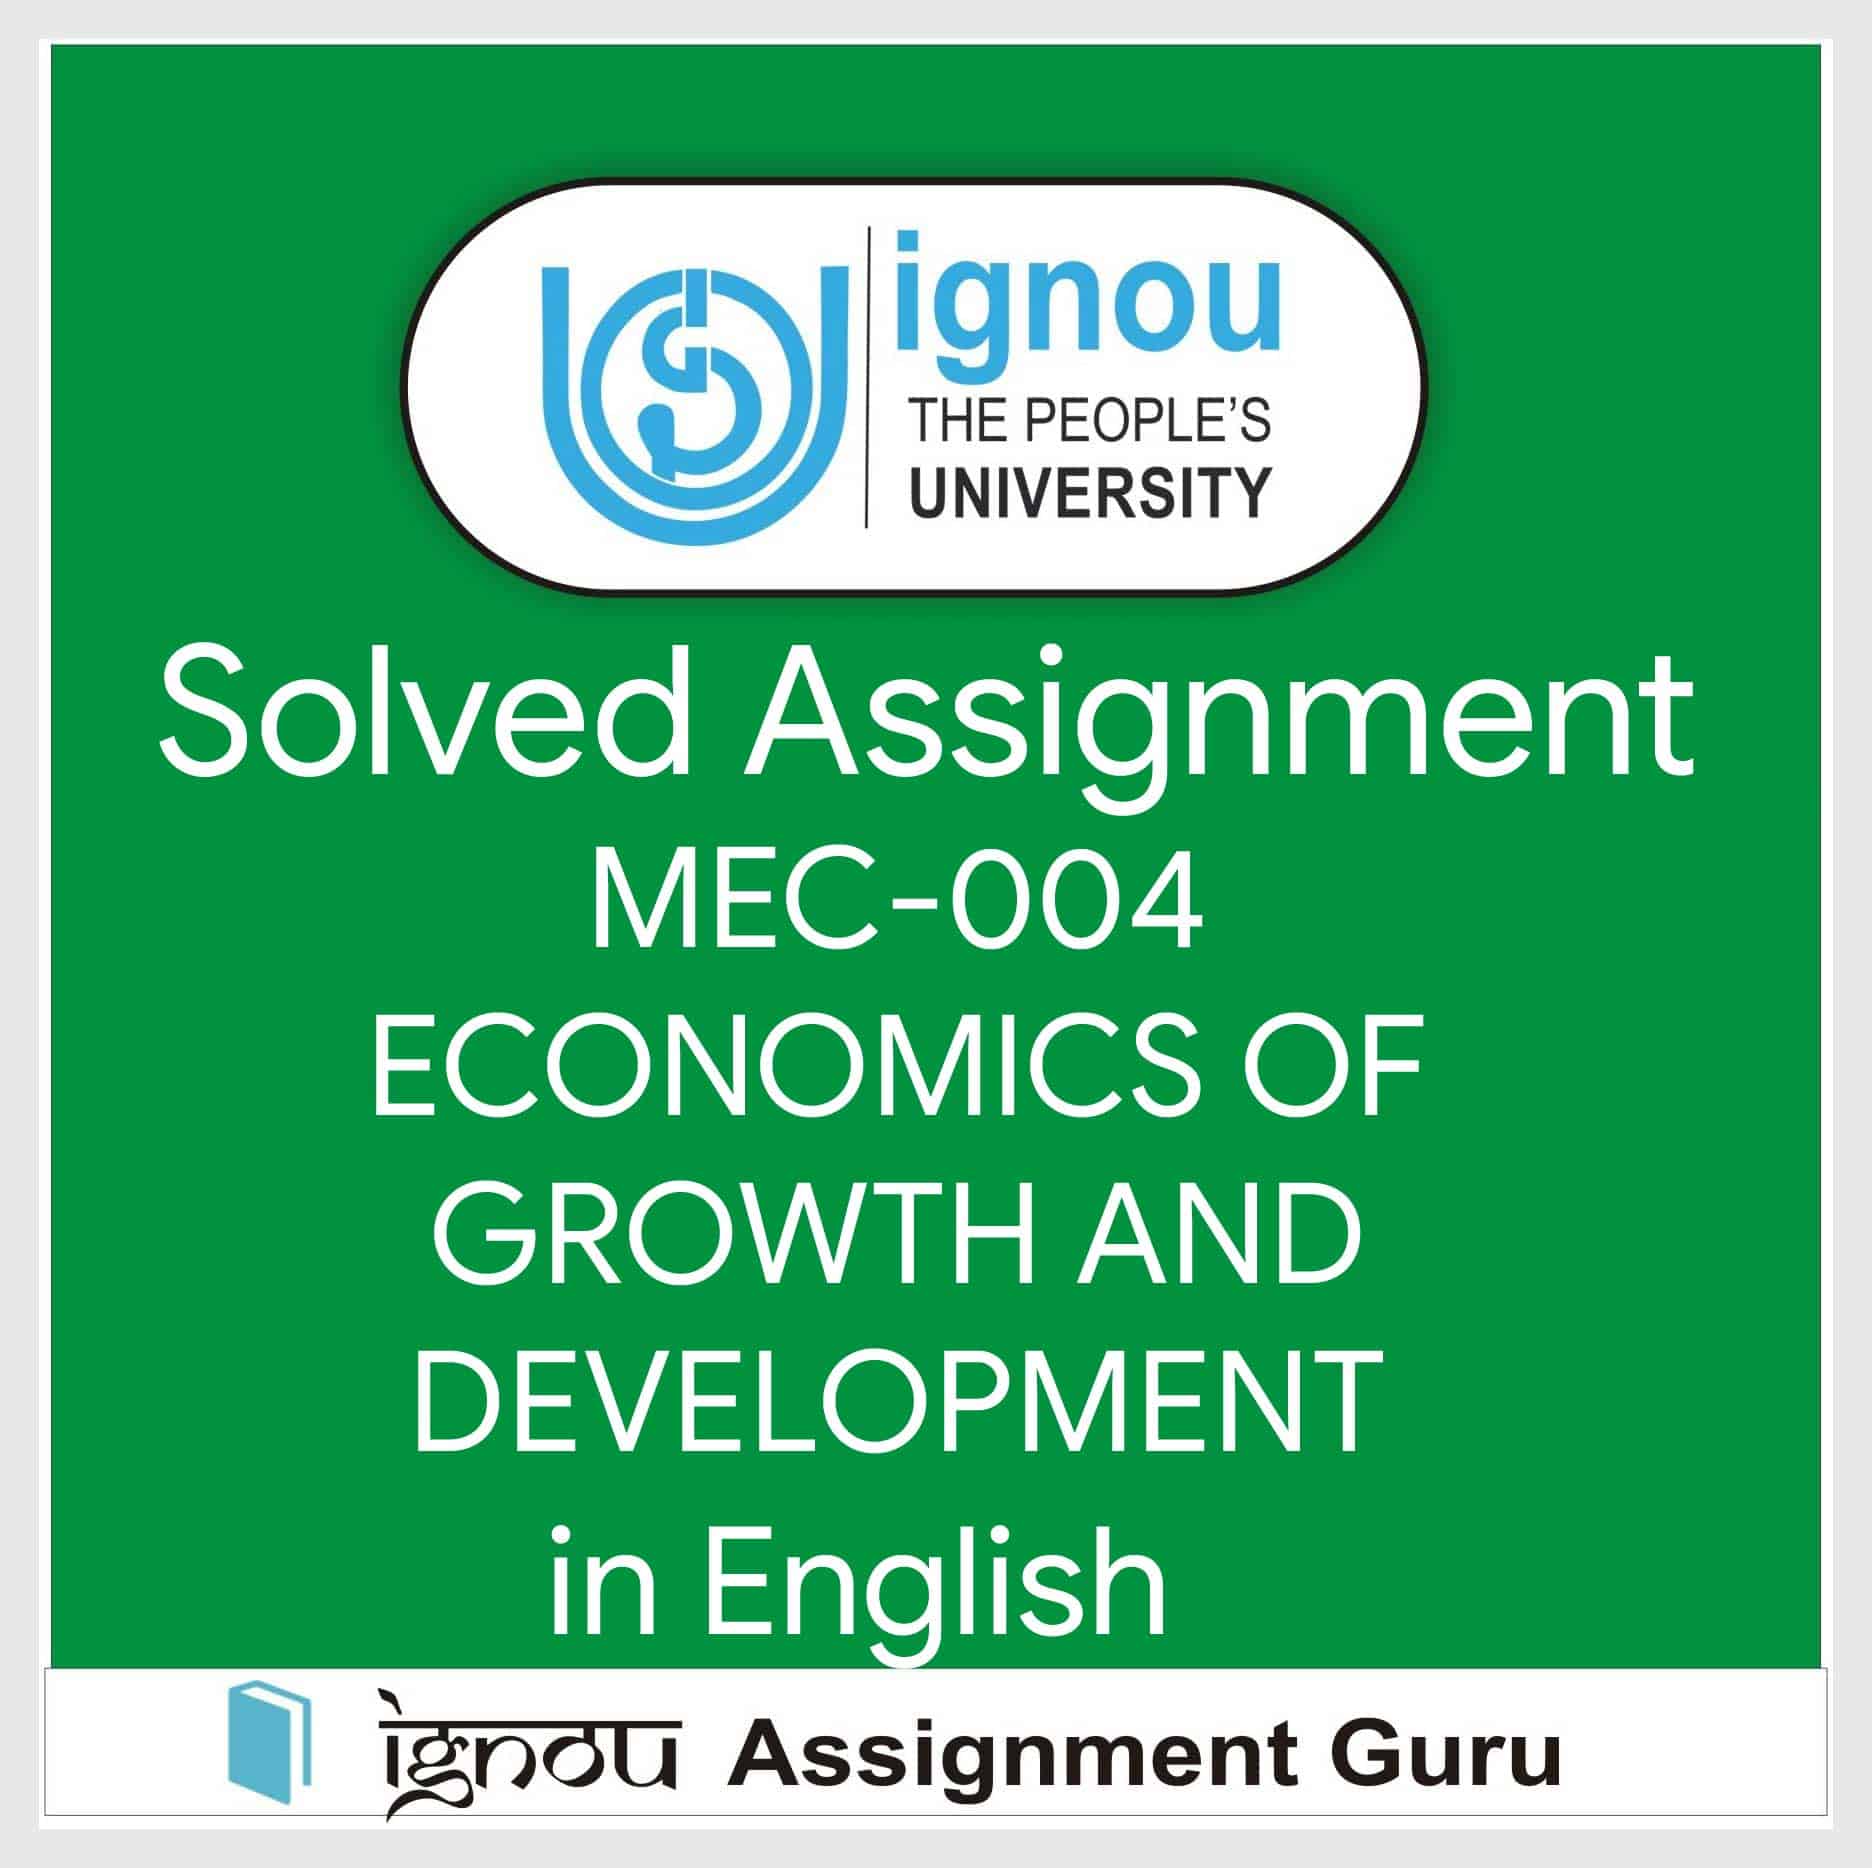 MEC-004 ECONOMICS OF GROWTH AND DEVELOPMENT in English Solved Assignment 2022-2023